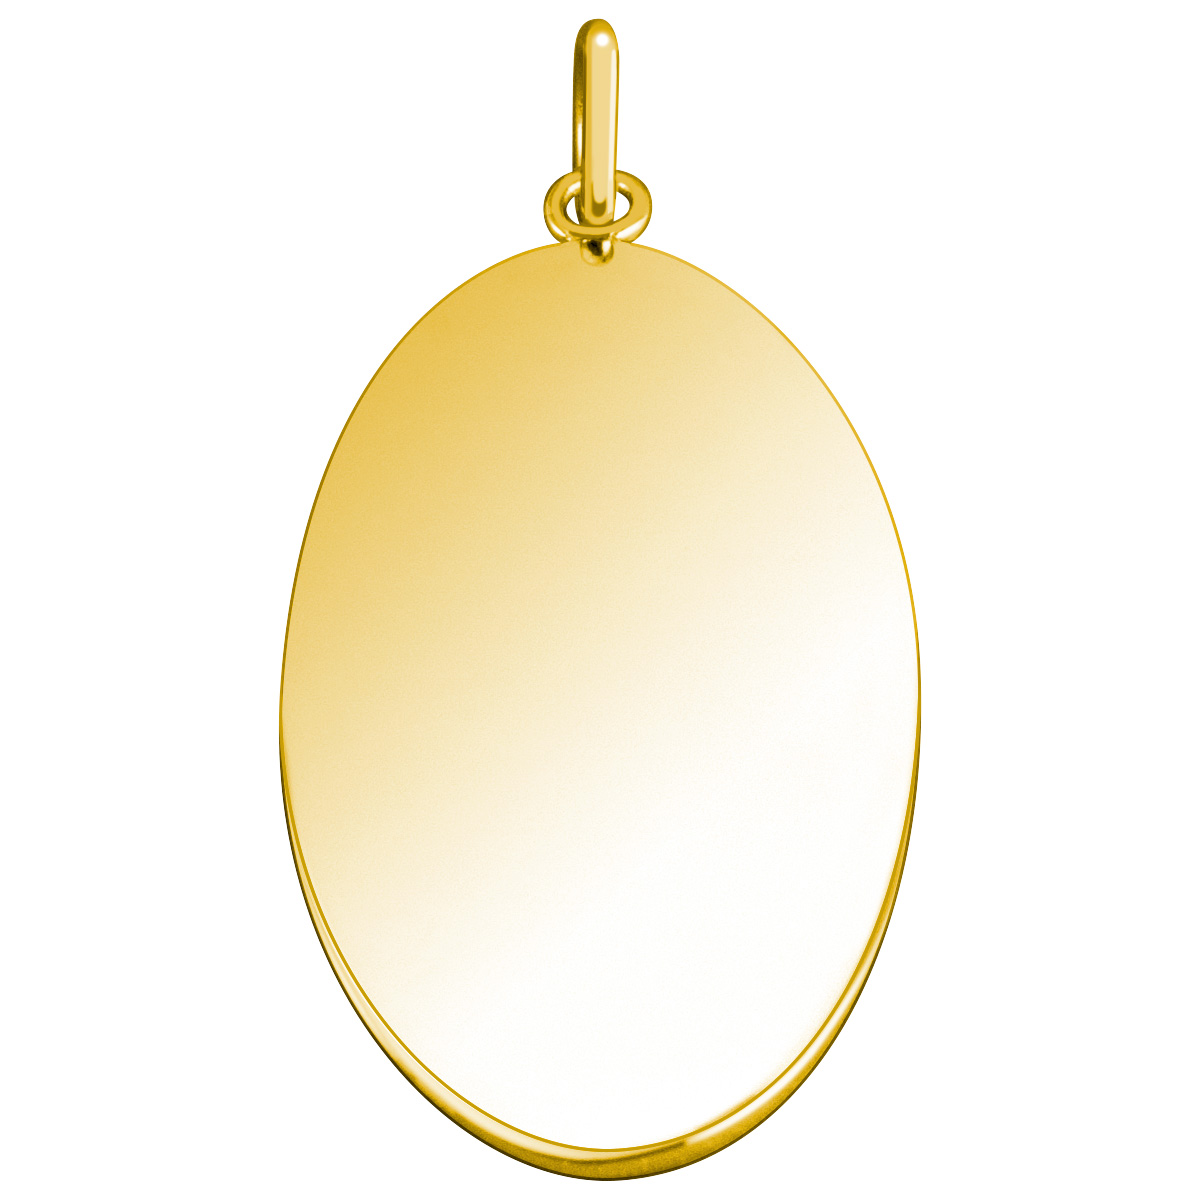 Engraving plate gold plated, oval, 35 x 20 x 1.4 mm, pendant